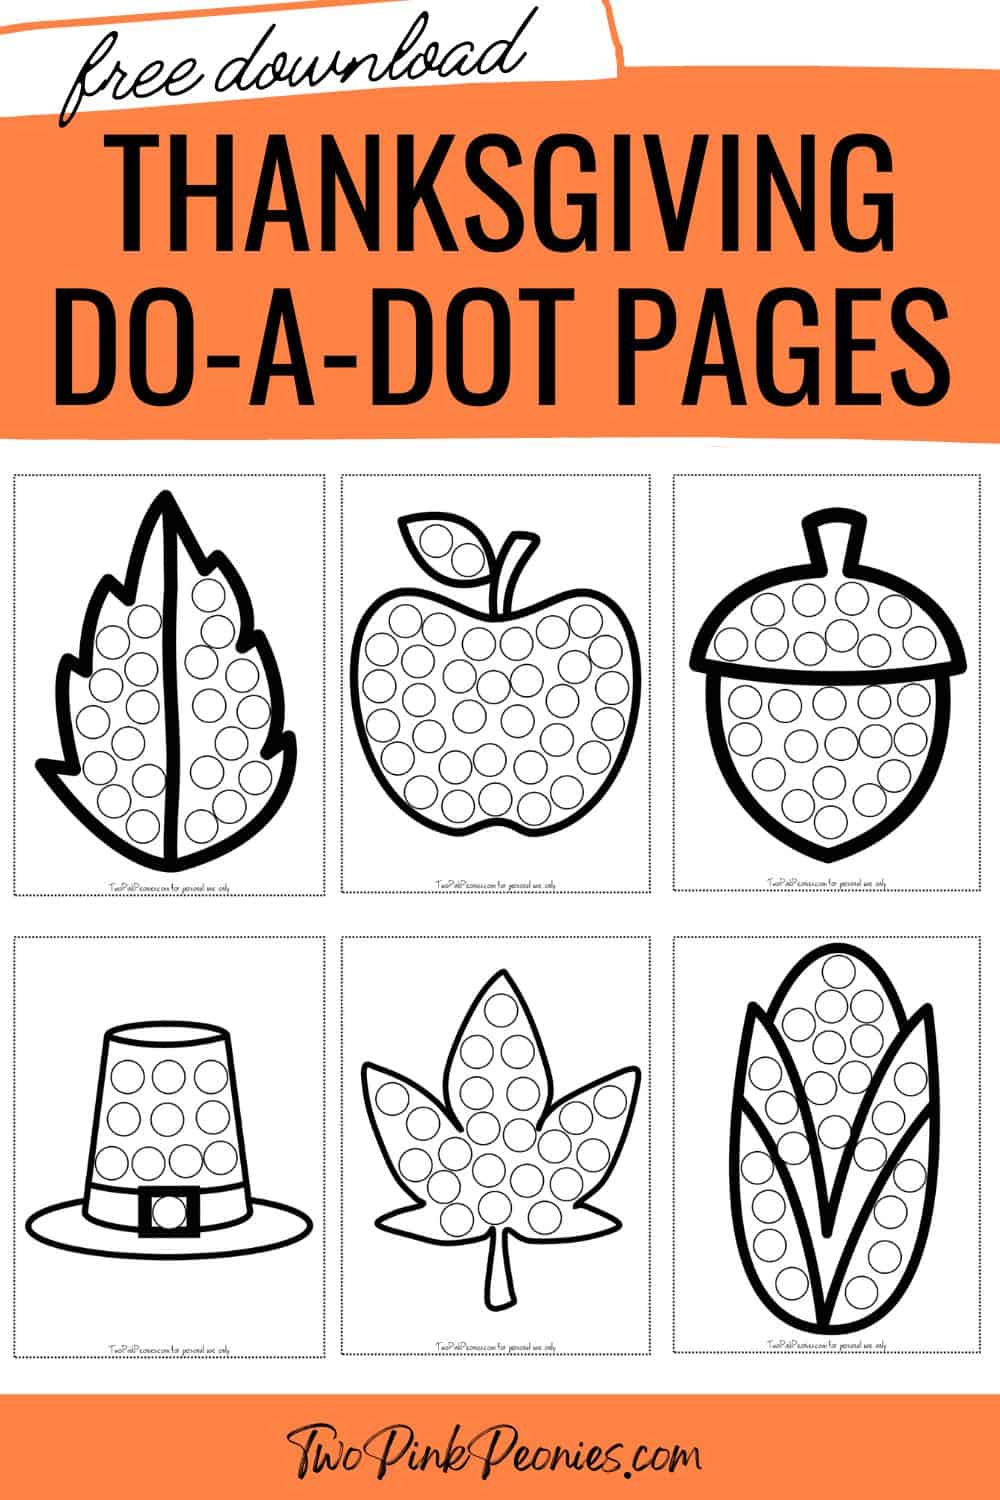 text that says free download Thanksgiving do-a-dot pages below are mock ups of all the Thanksgiving themed dot marker pages. 